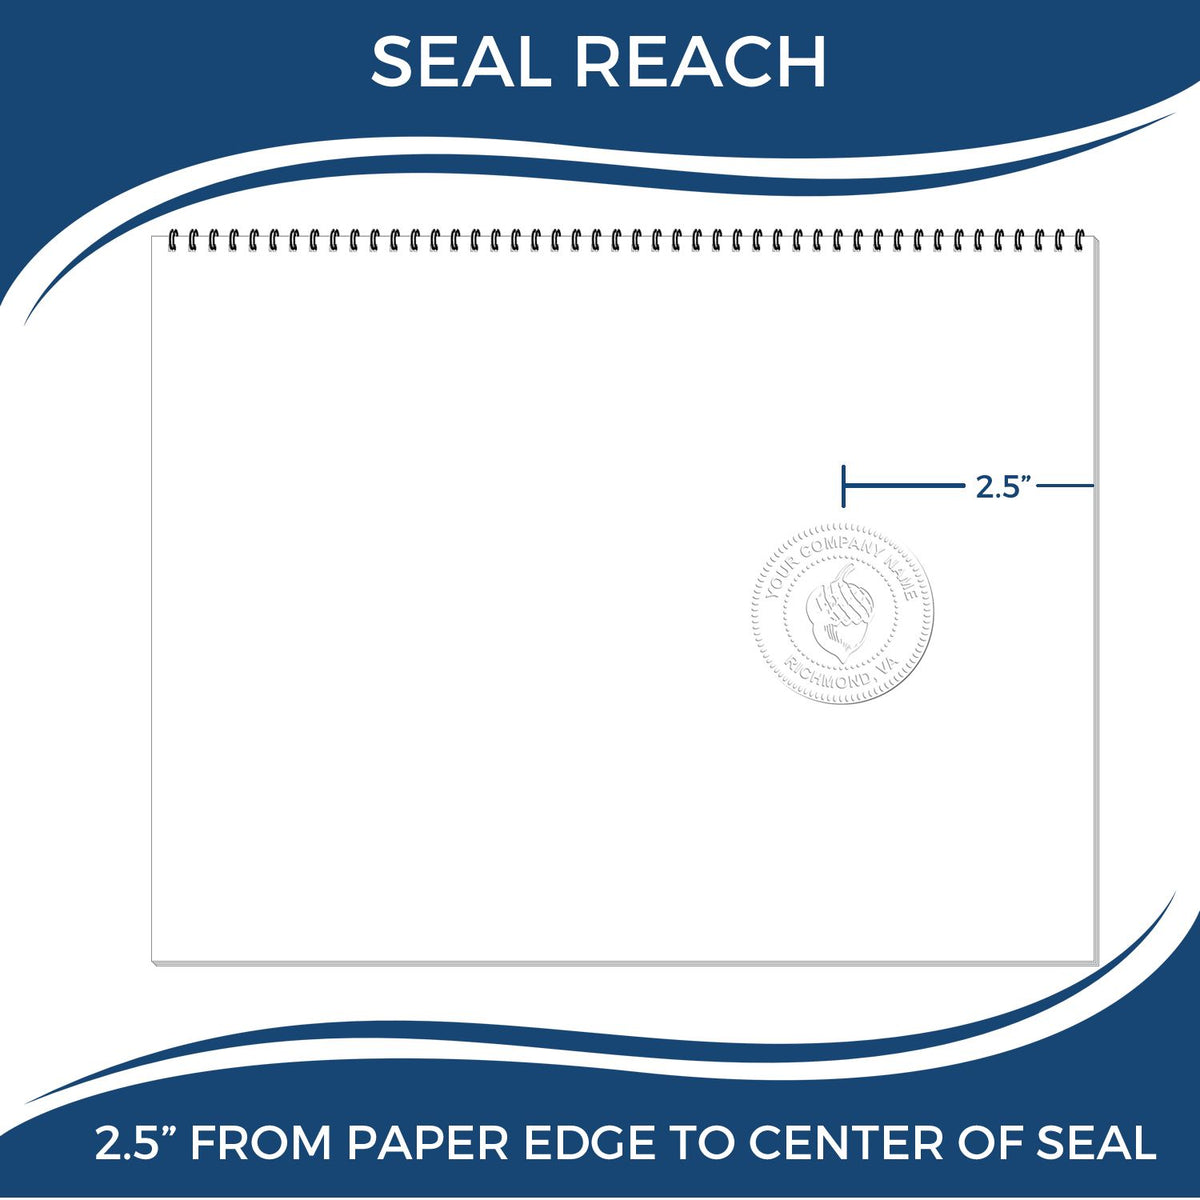 An infographic showing the seal reach which is represented by a ruler and a miniature seal image of the Heavy Duty Cast Iron Arizona Engineer Seal Embosser